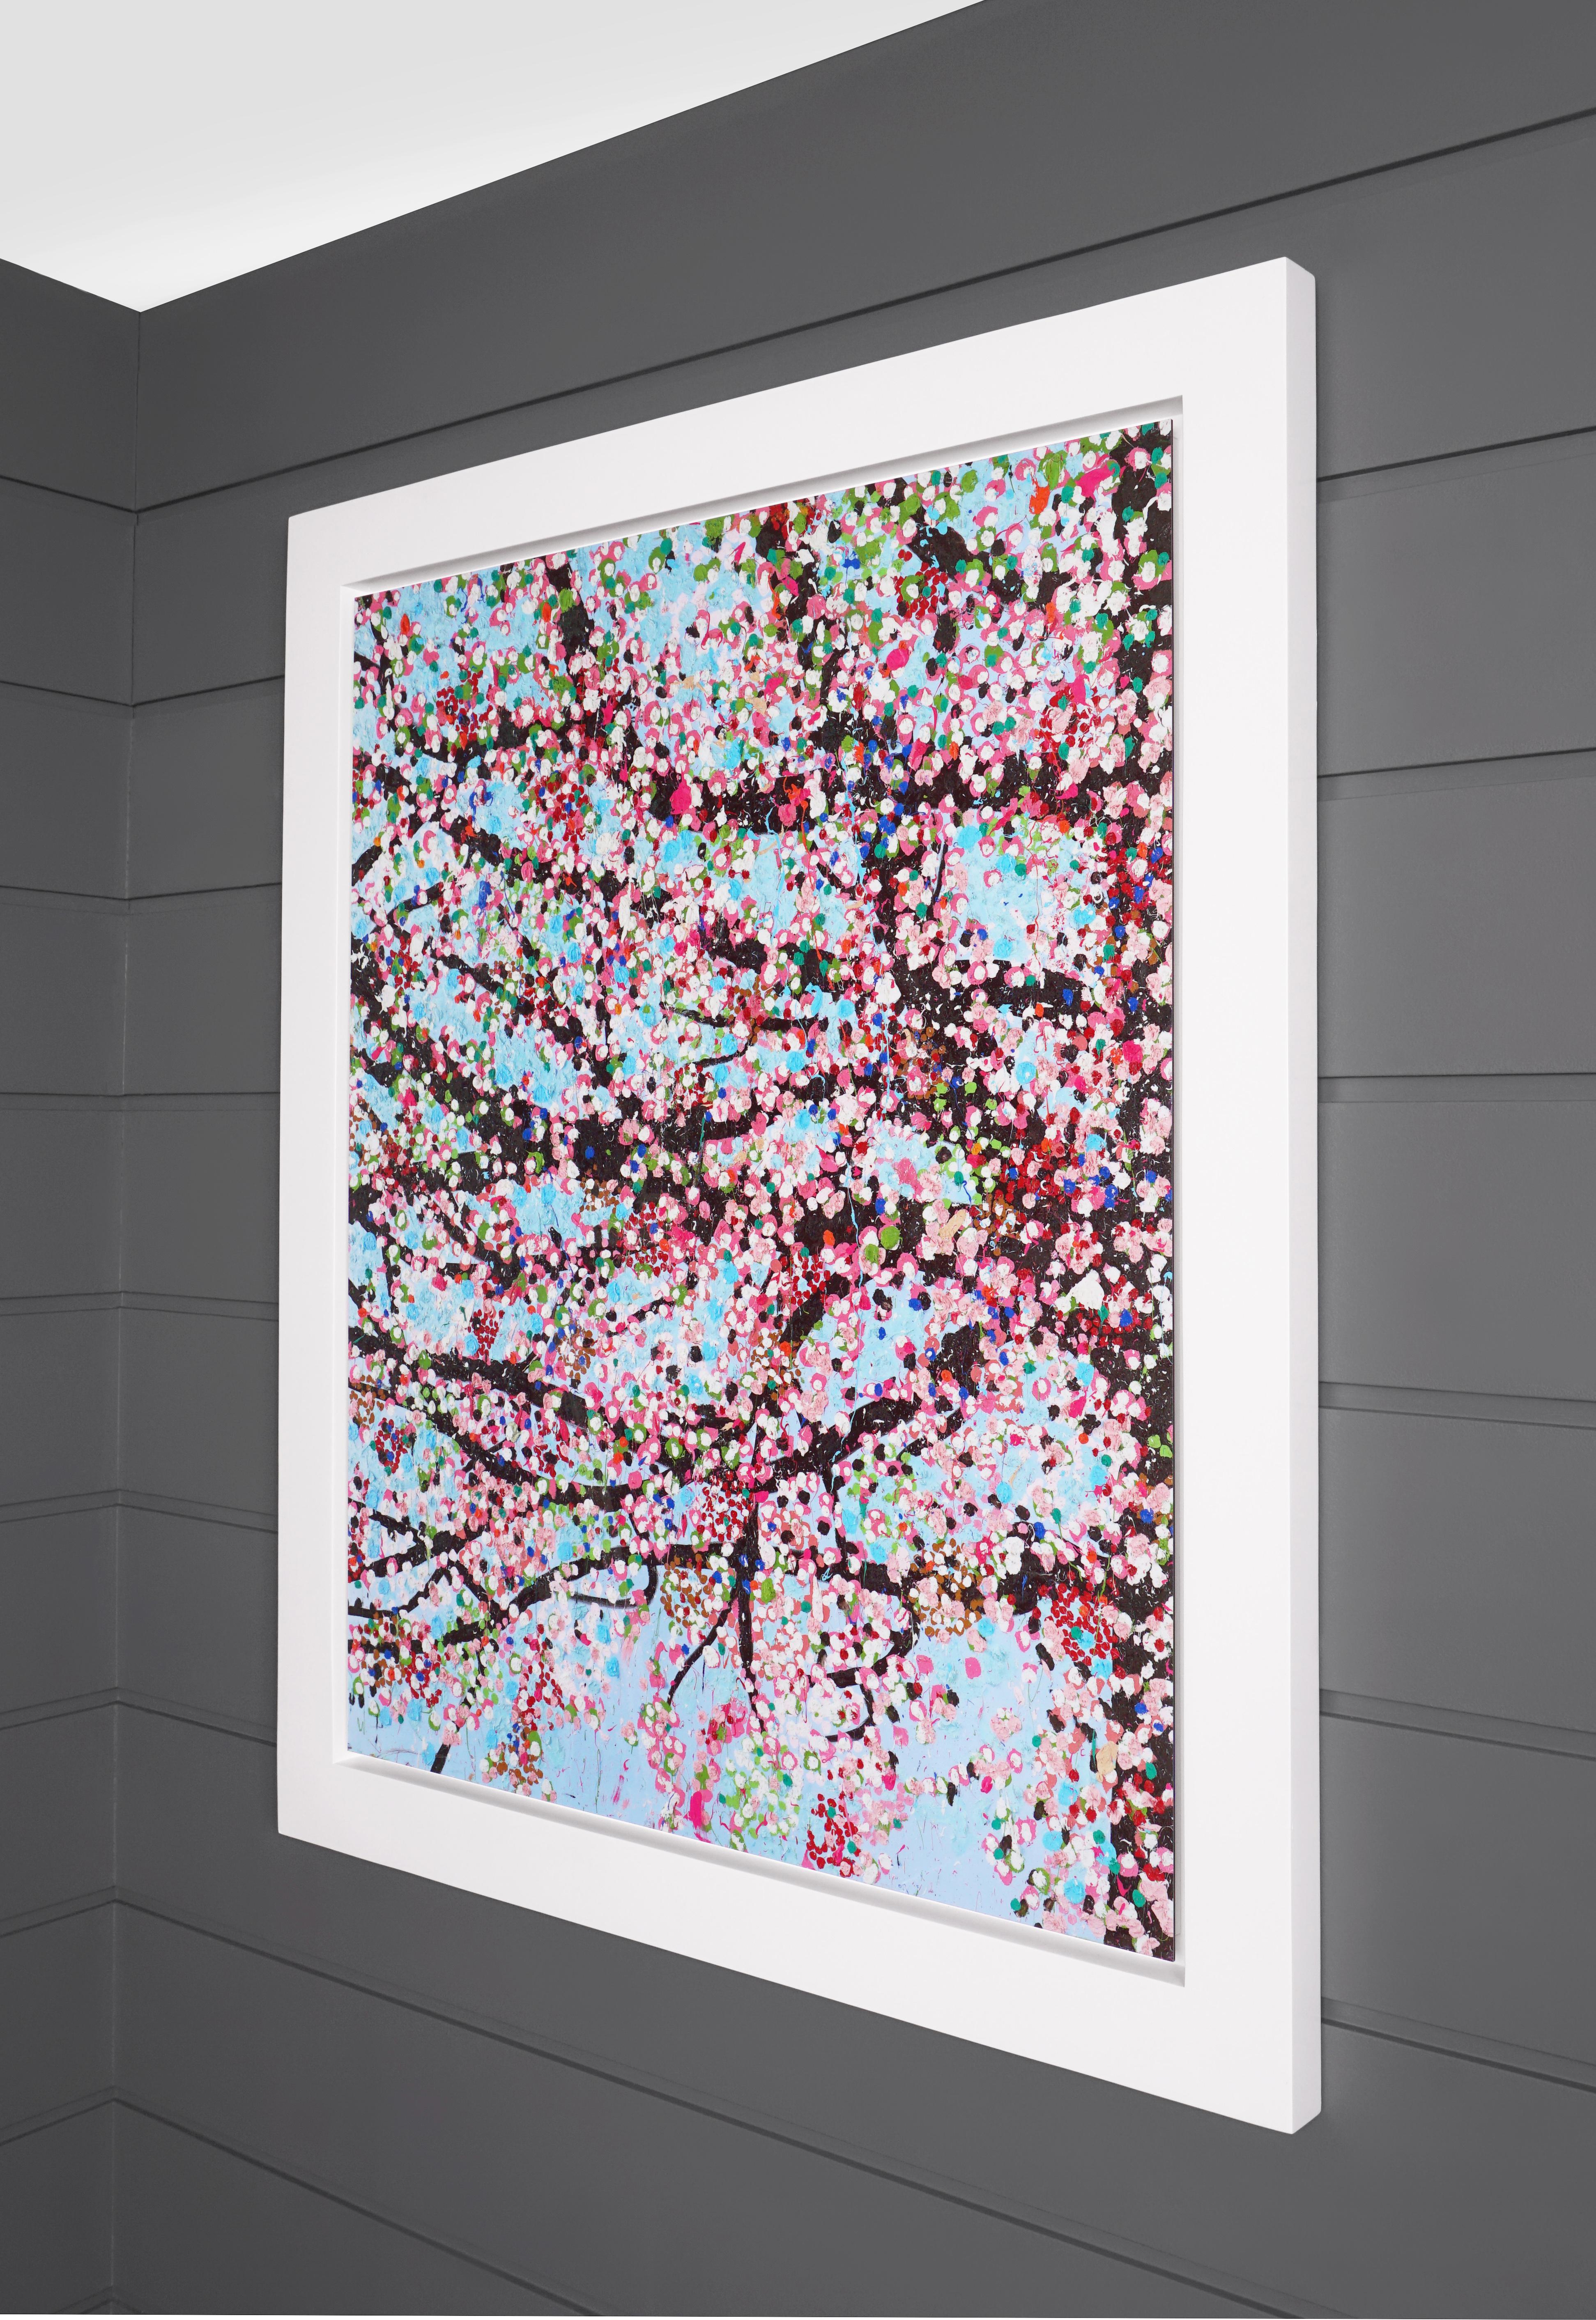 The Virtues 'Loyalty', Limited Edition 'Cherry Blossom' Landscape - Gray Abstract Print by Damien Hirst